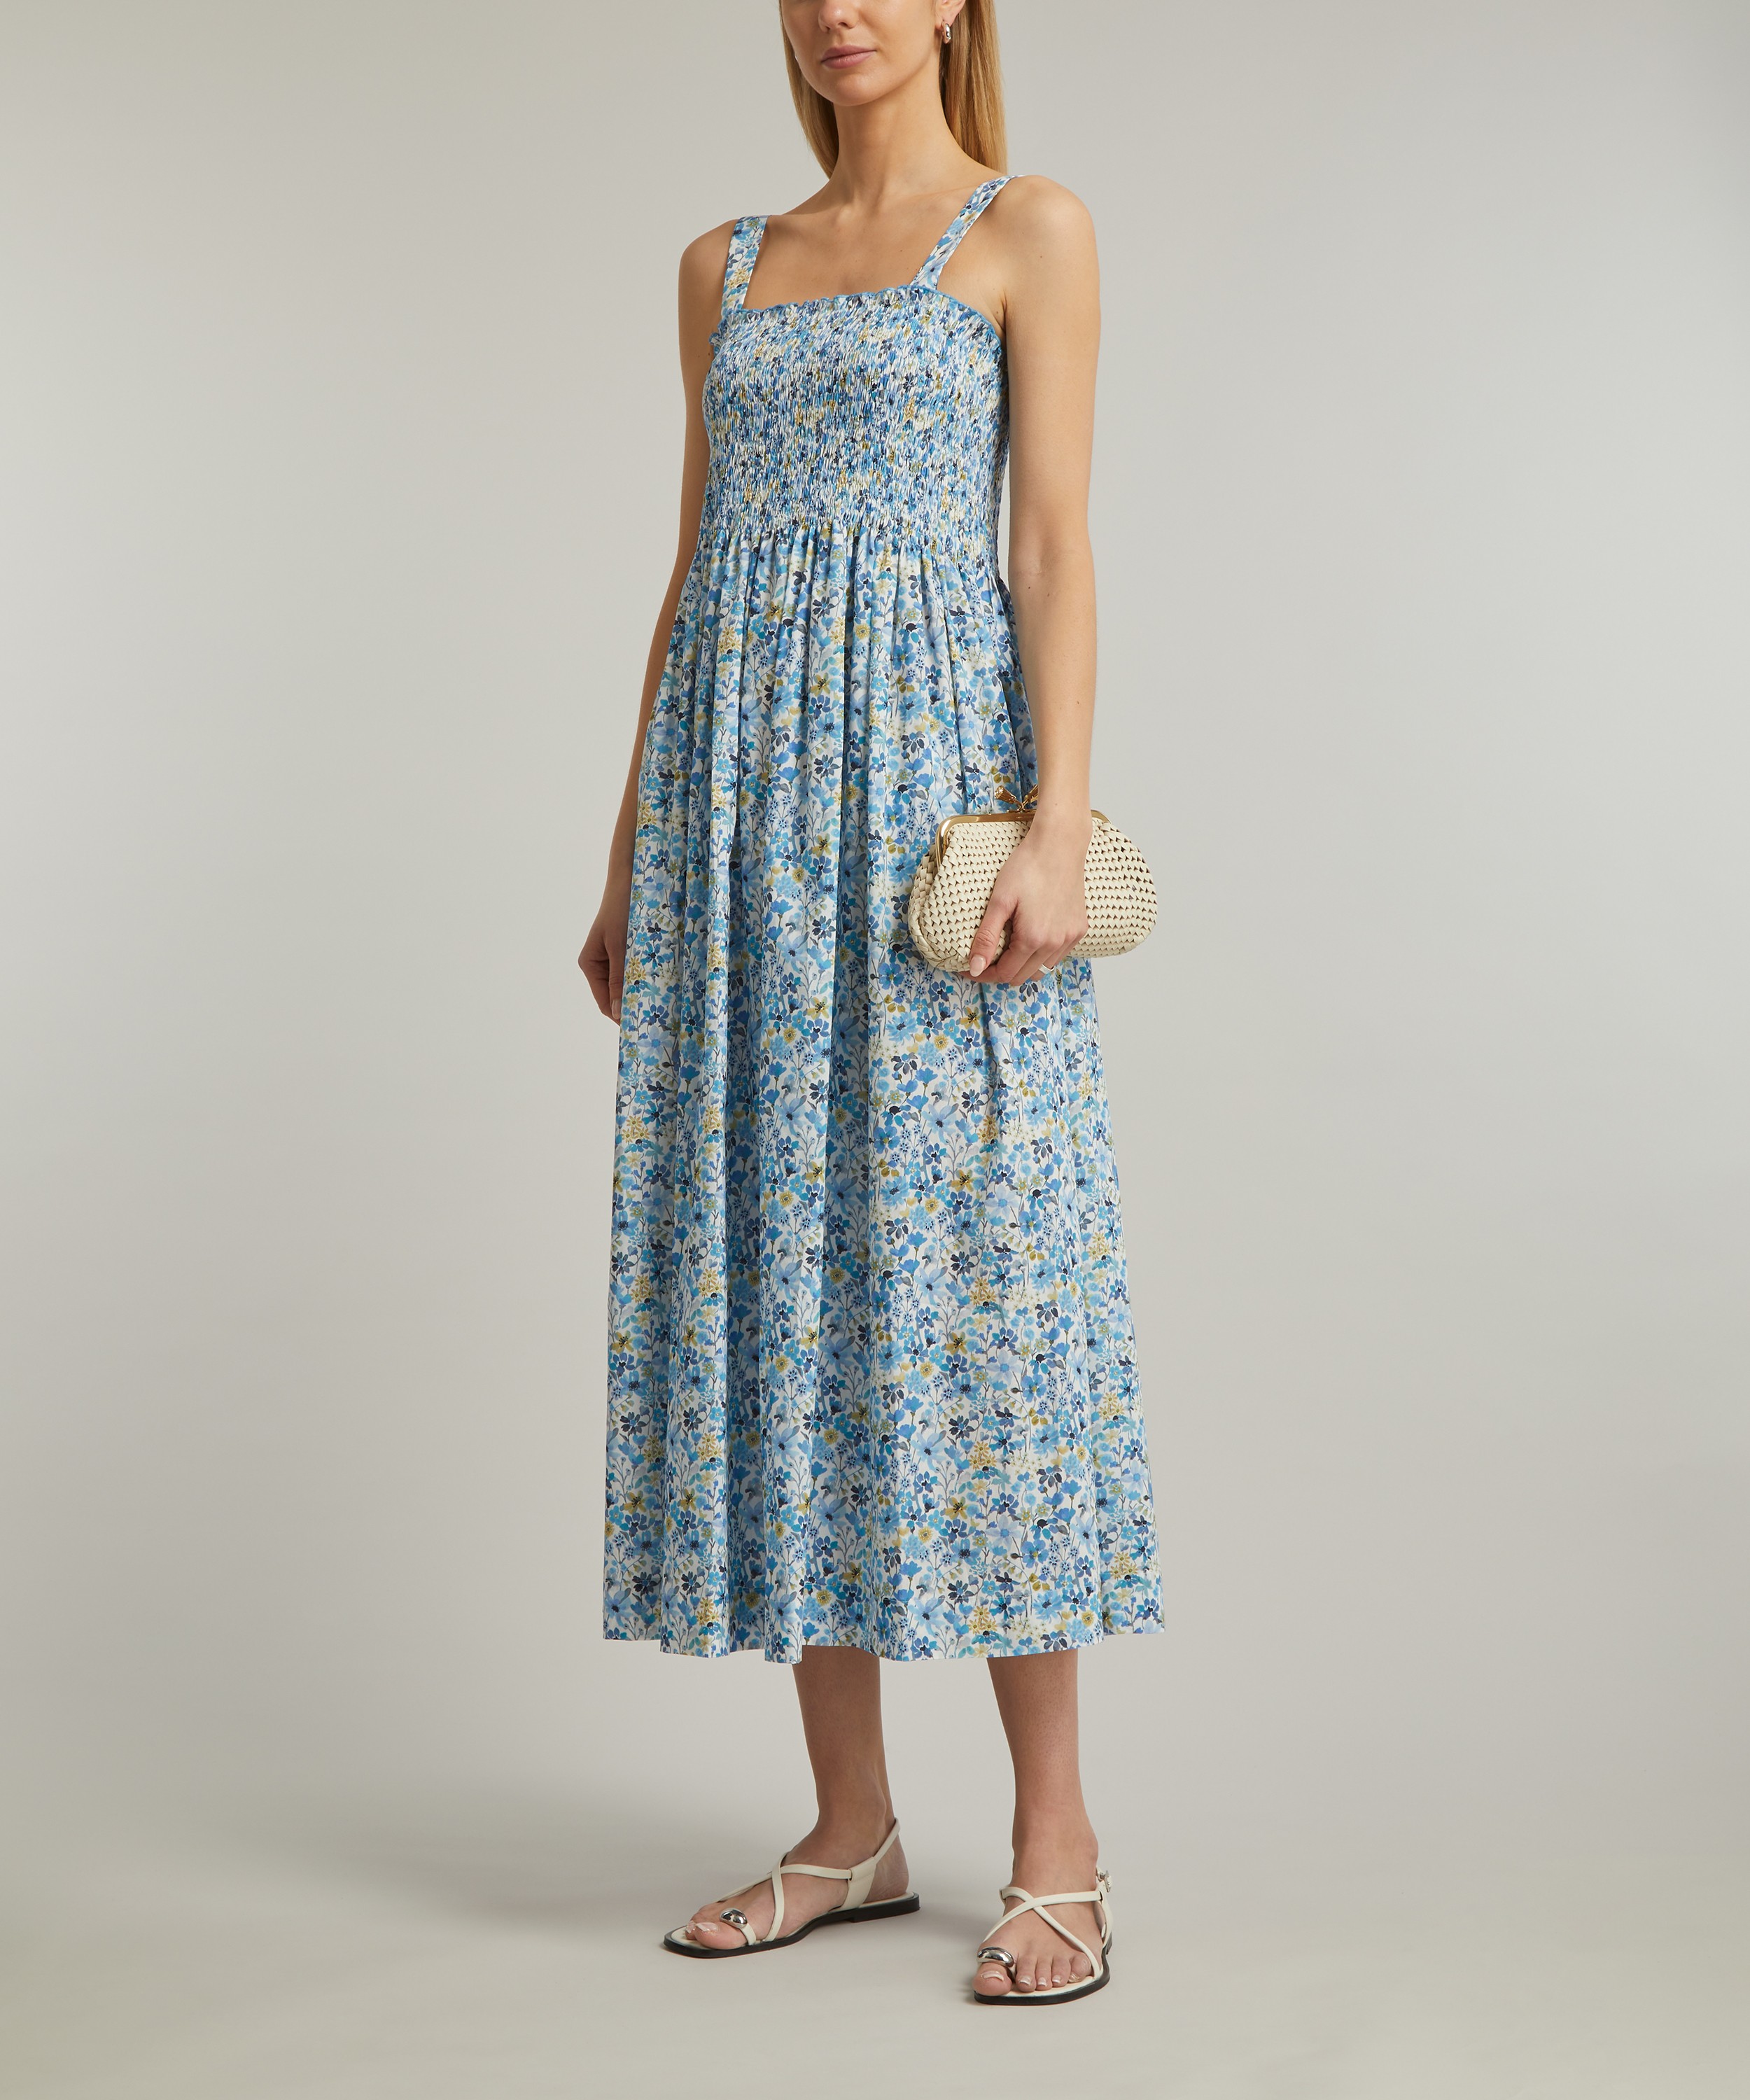 Liberty - Dreams of Summer Tana Lawn™ Cotton Voyage Sun-Dress image number 1